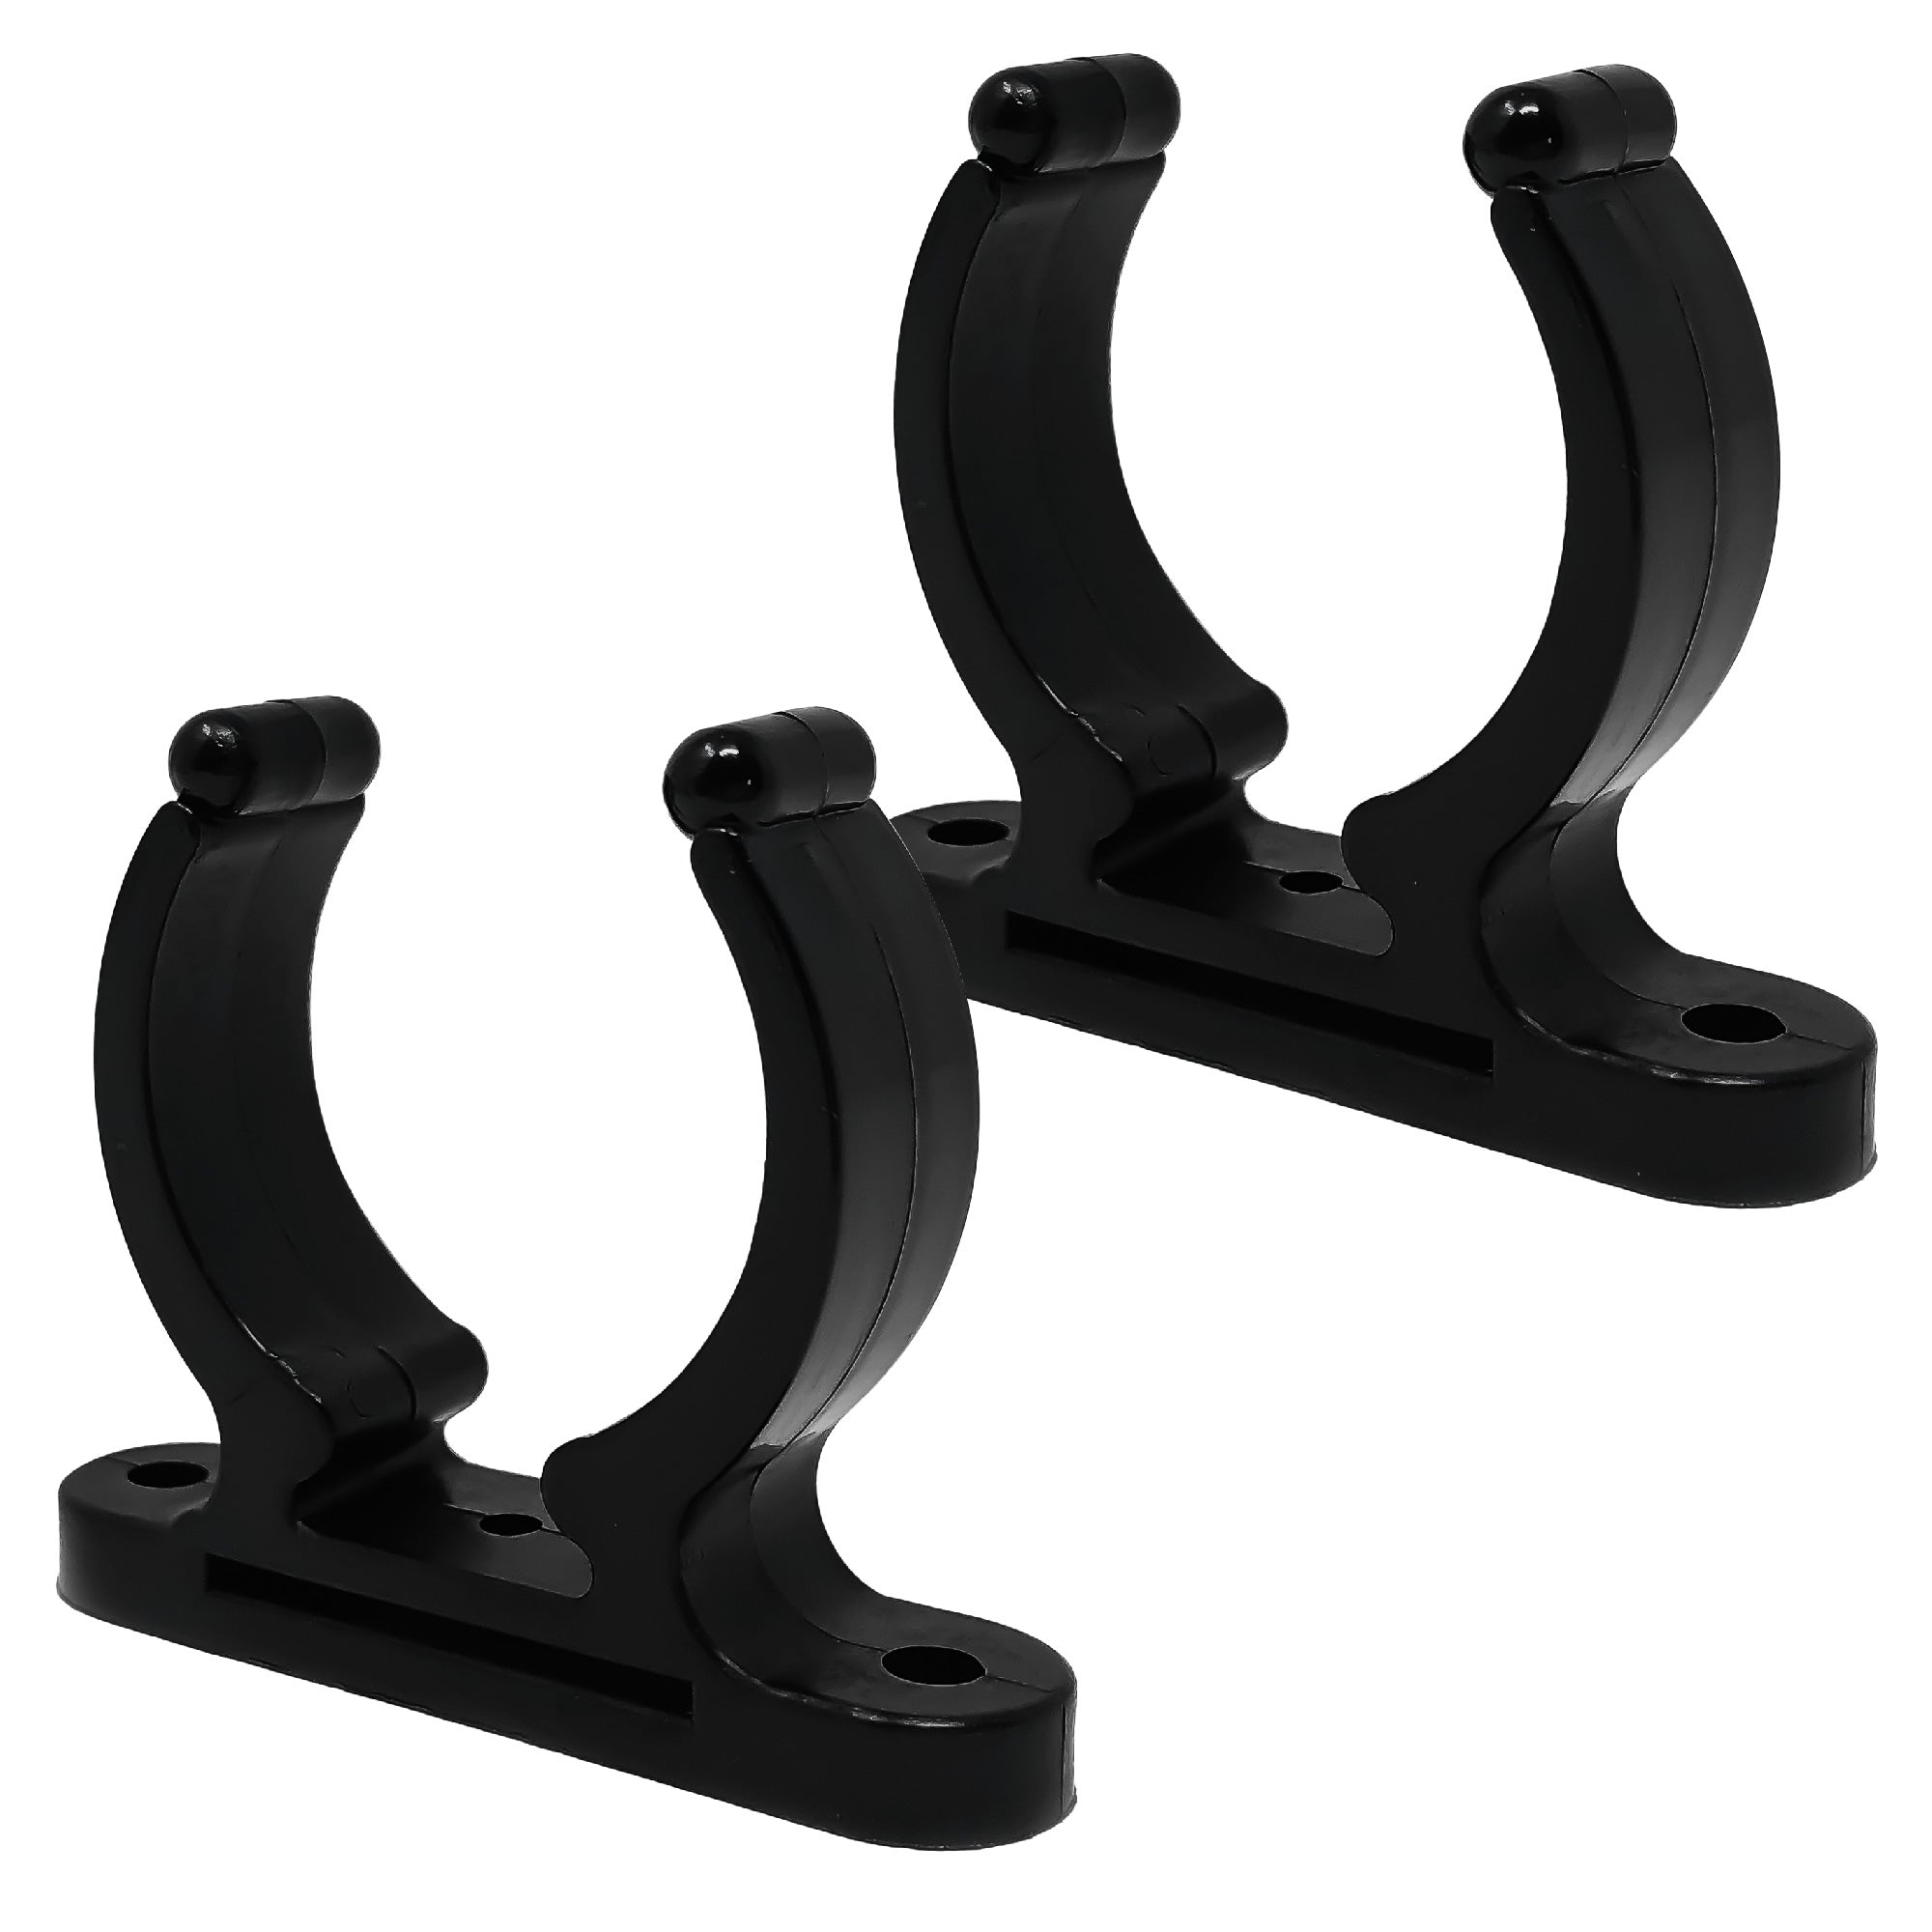 Five Oceans Boat Hook Holder, Spring Clips Up to 1-1/2 Tube Diameter, 2-Pack - FO1843-M2